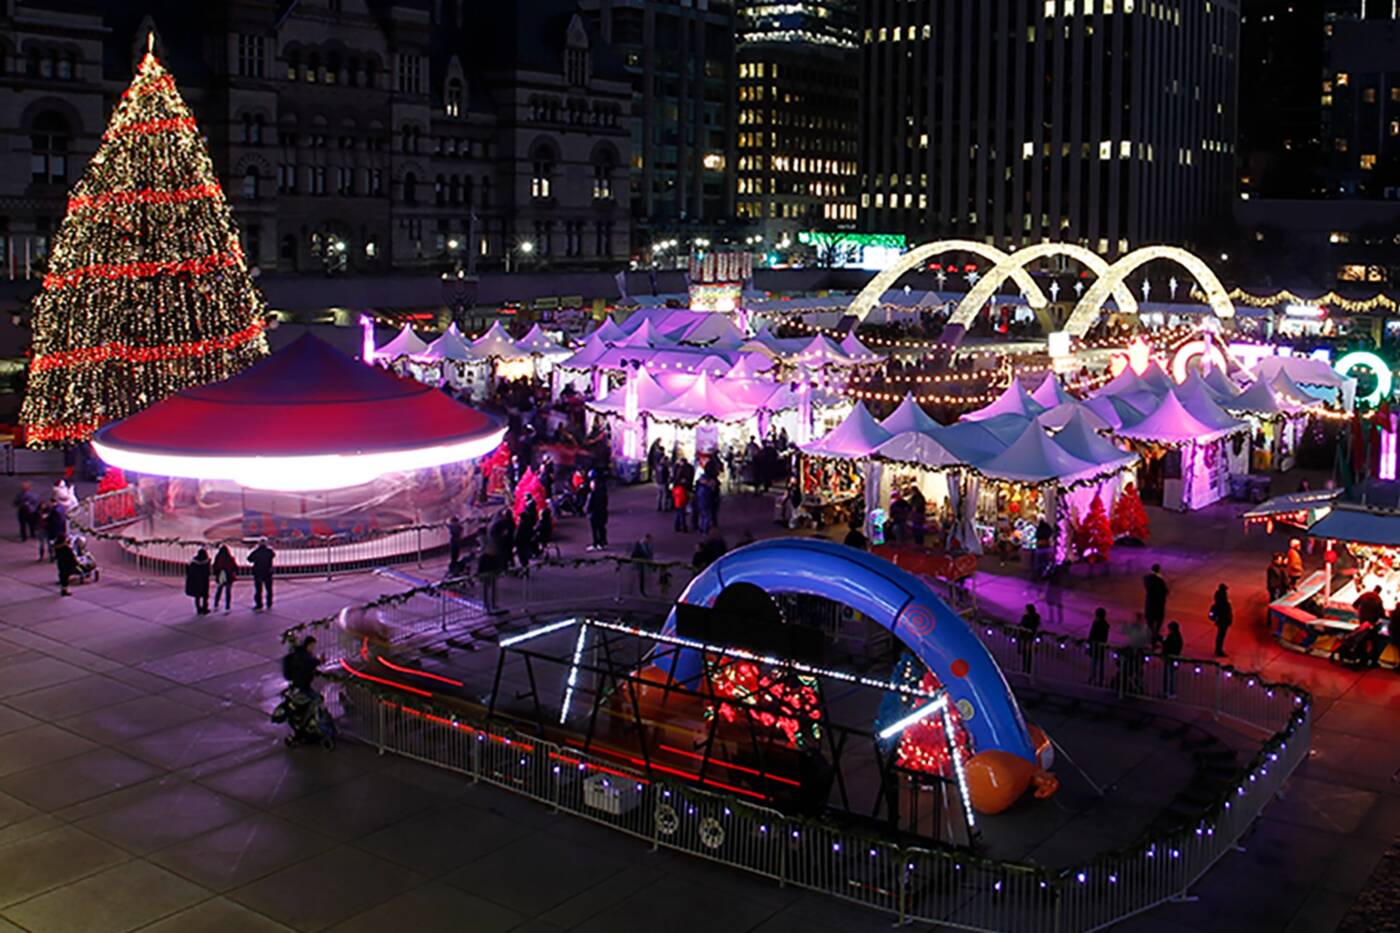 Holiday Fair in the Square